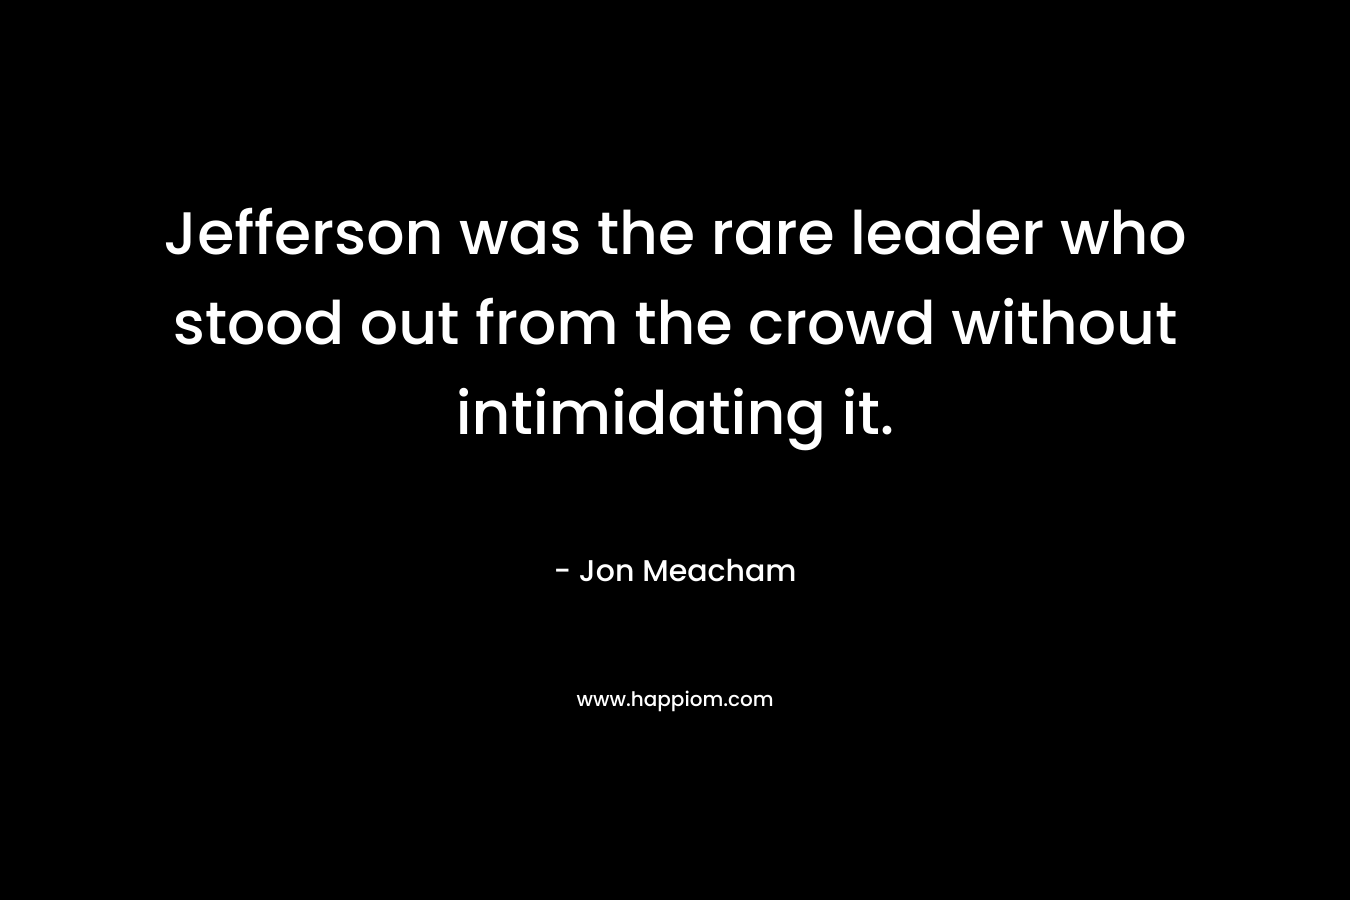 Jefferson was the rare leader who stood out from the crowd without intimidating it. – Jon Meacham